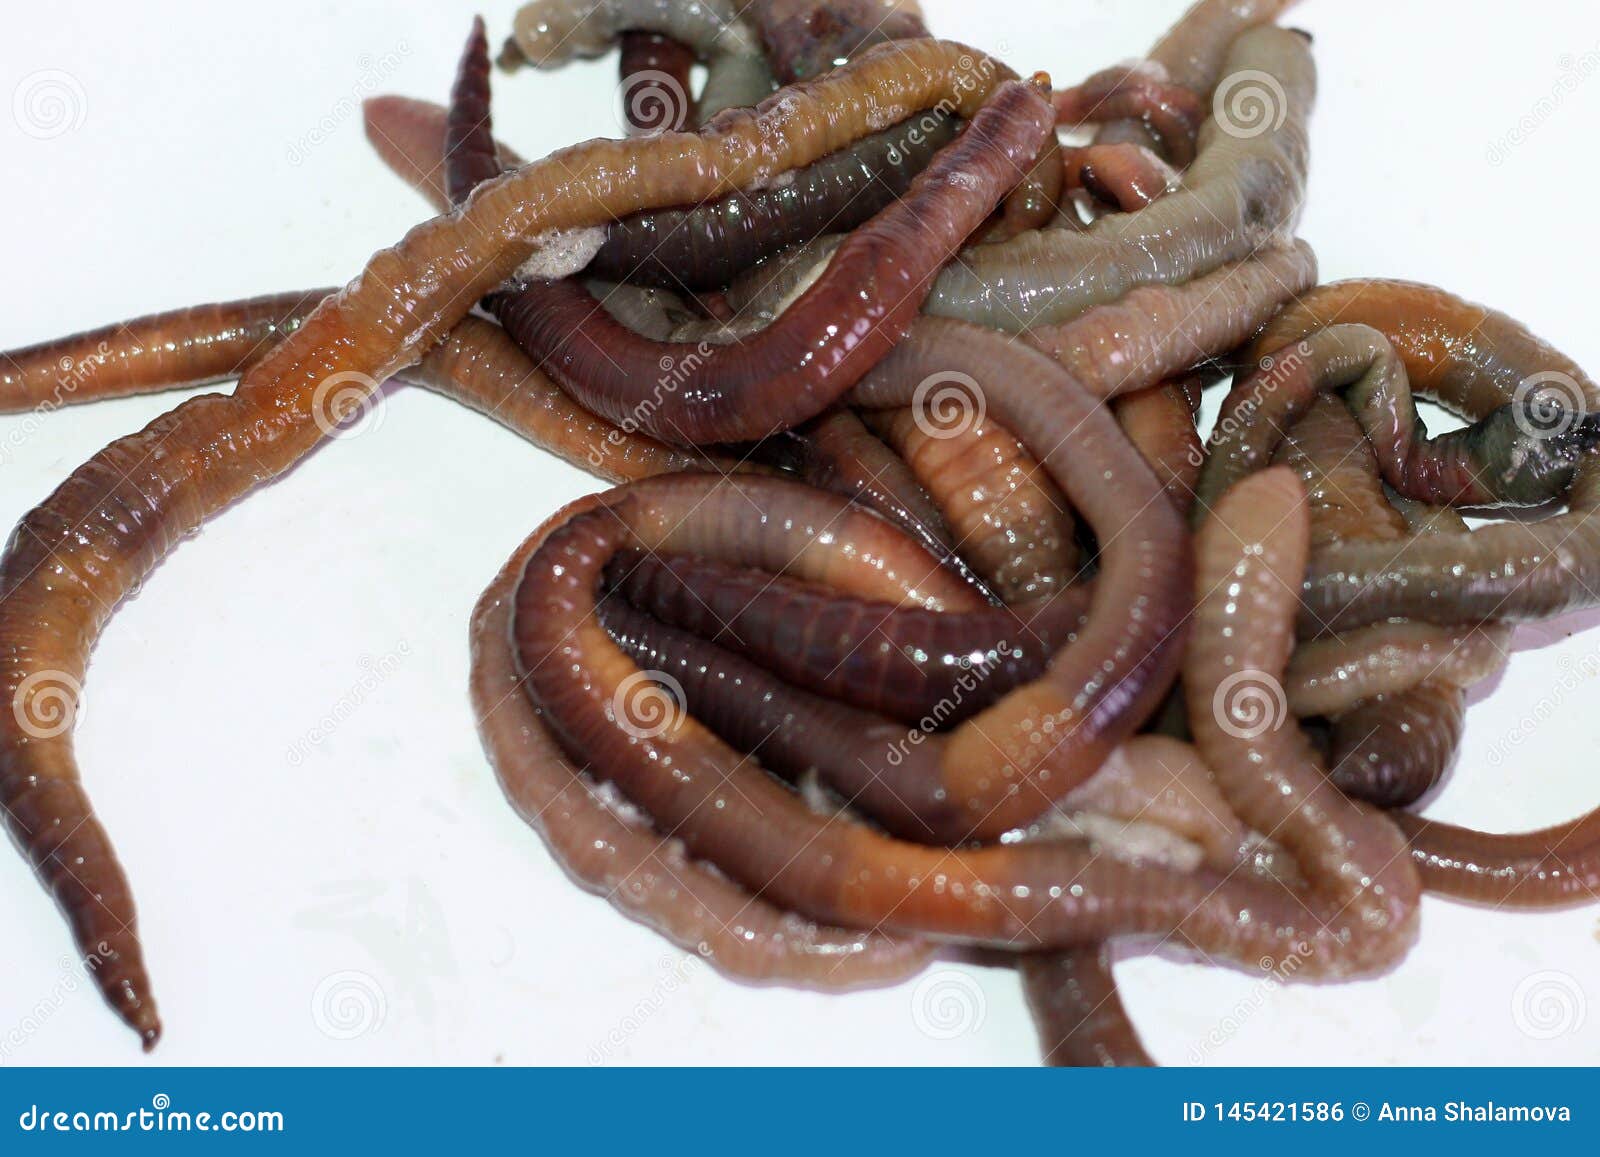 535 Live Earthworm Stock Photos - Free & Royalty-Free Stock Photos from  Dreamstime